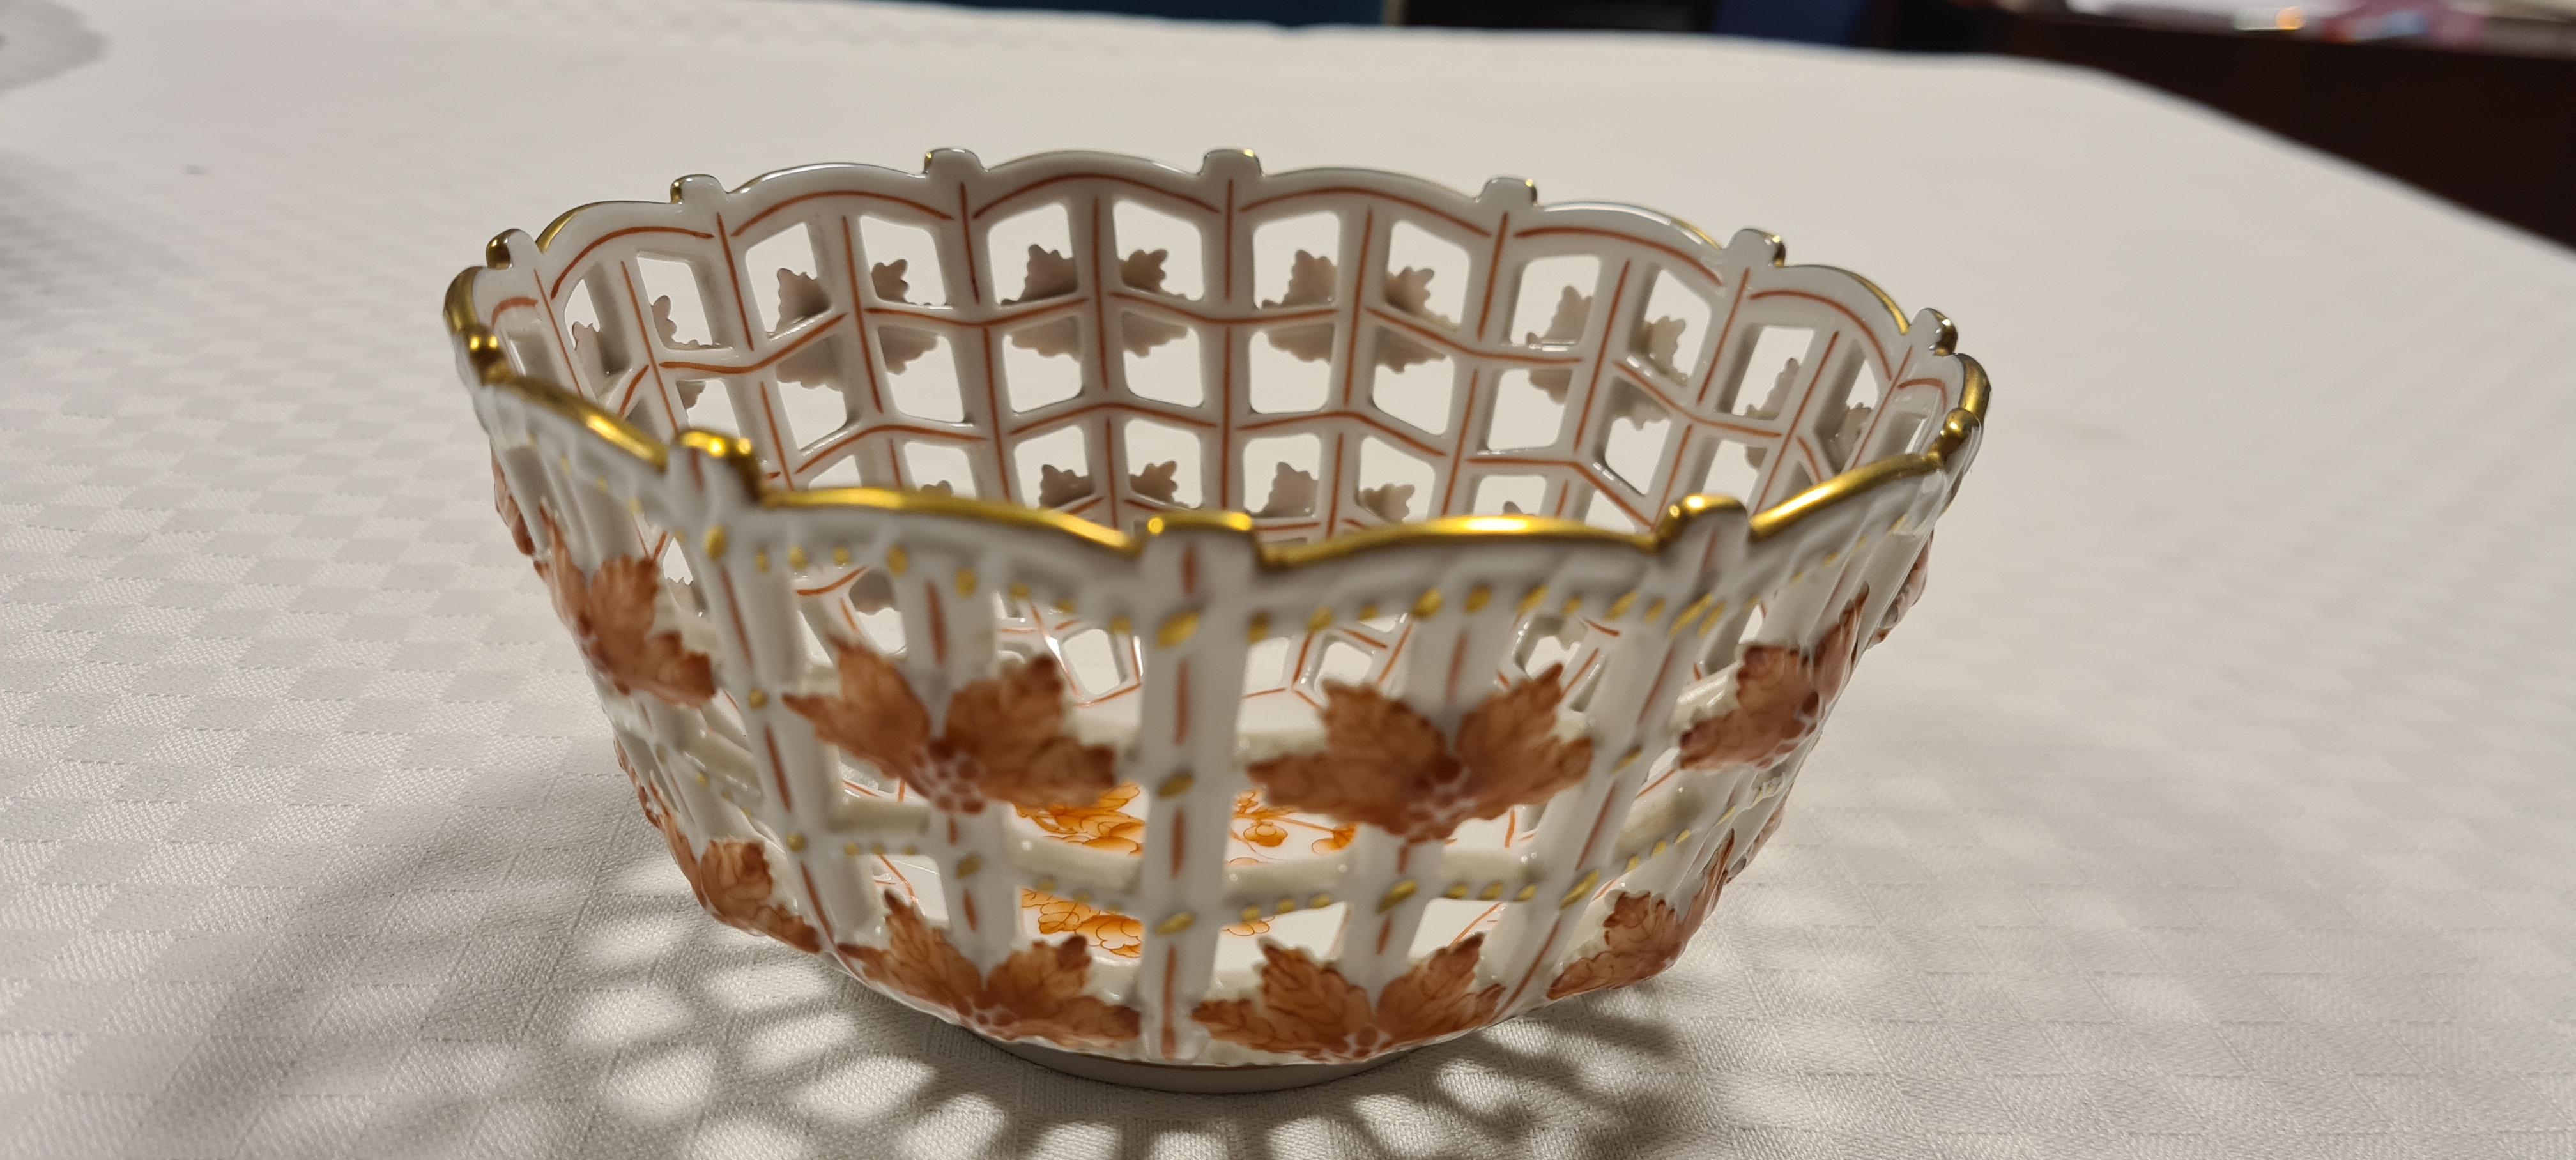 Porcelain potpourri basket by Herend Hungary.

Fine and rare basket made of the finest porcelain and hand-painted with enamel and 24-karat gold details.

Made by the leading Hungarian manufacturer Herend.

Part of the Apponyi collection in the